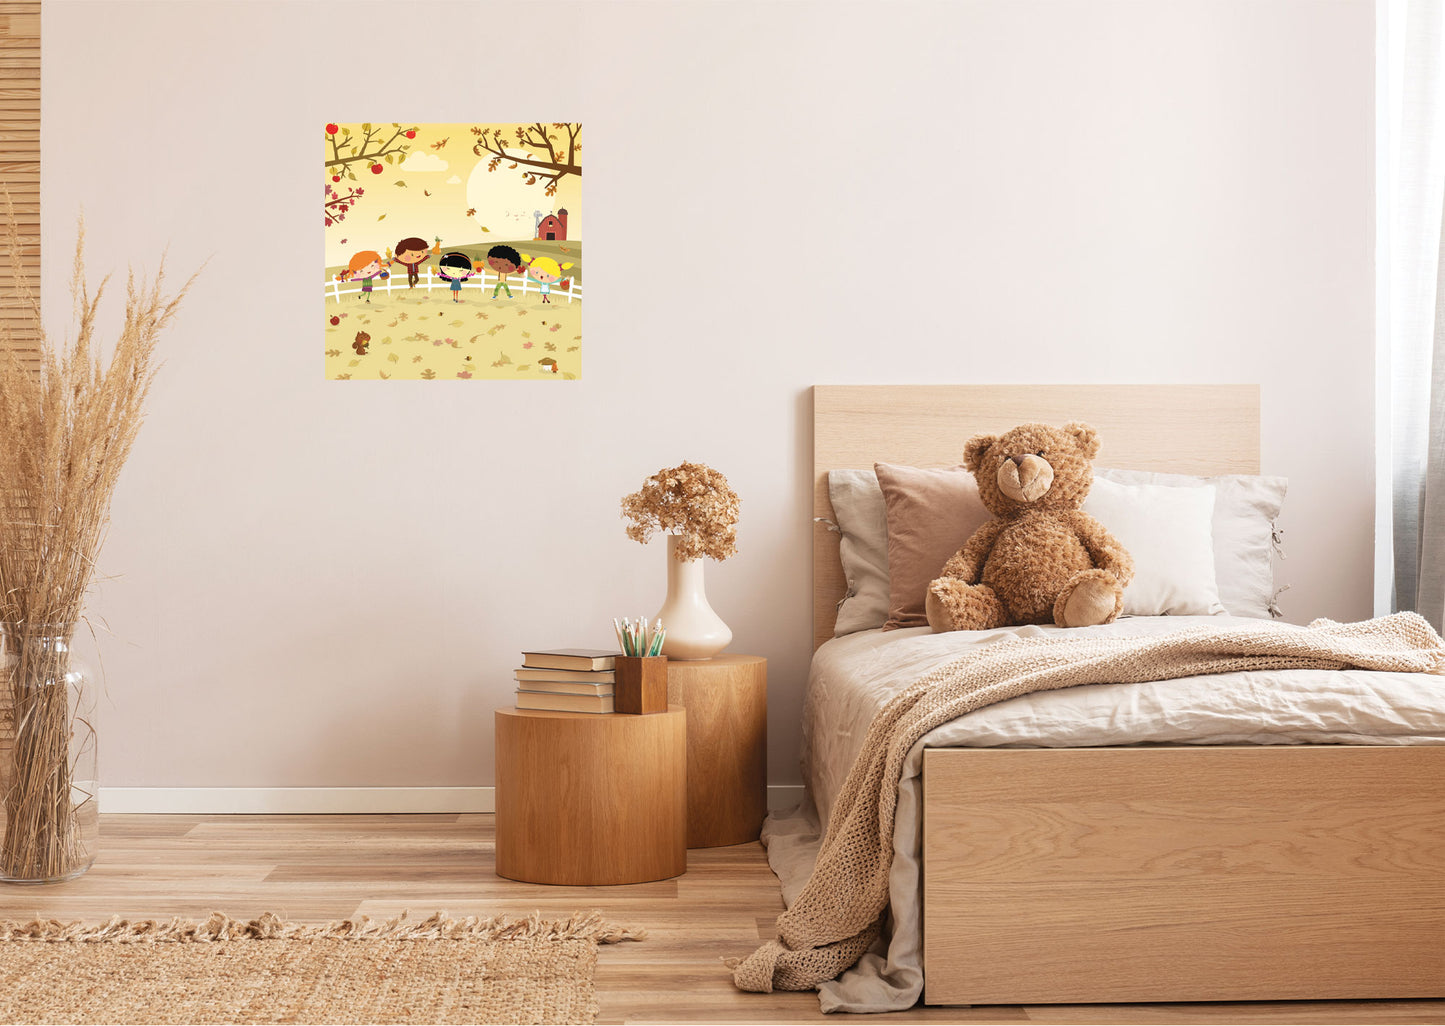 Seasons Decor: Autumn Kids in the Garden Mural        -   Removable Wall   Adhesive Decal